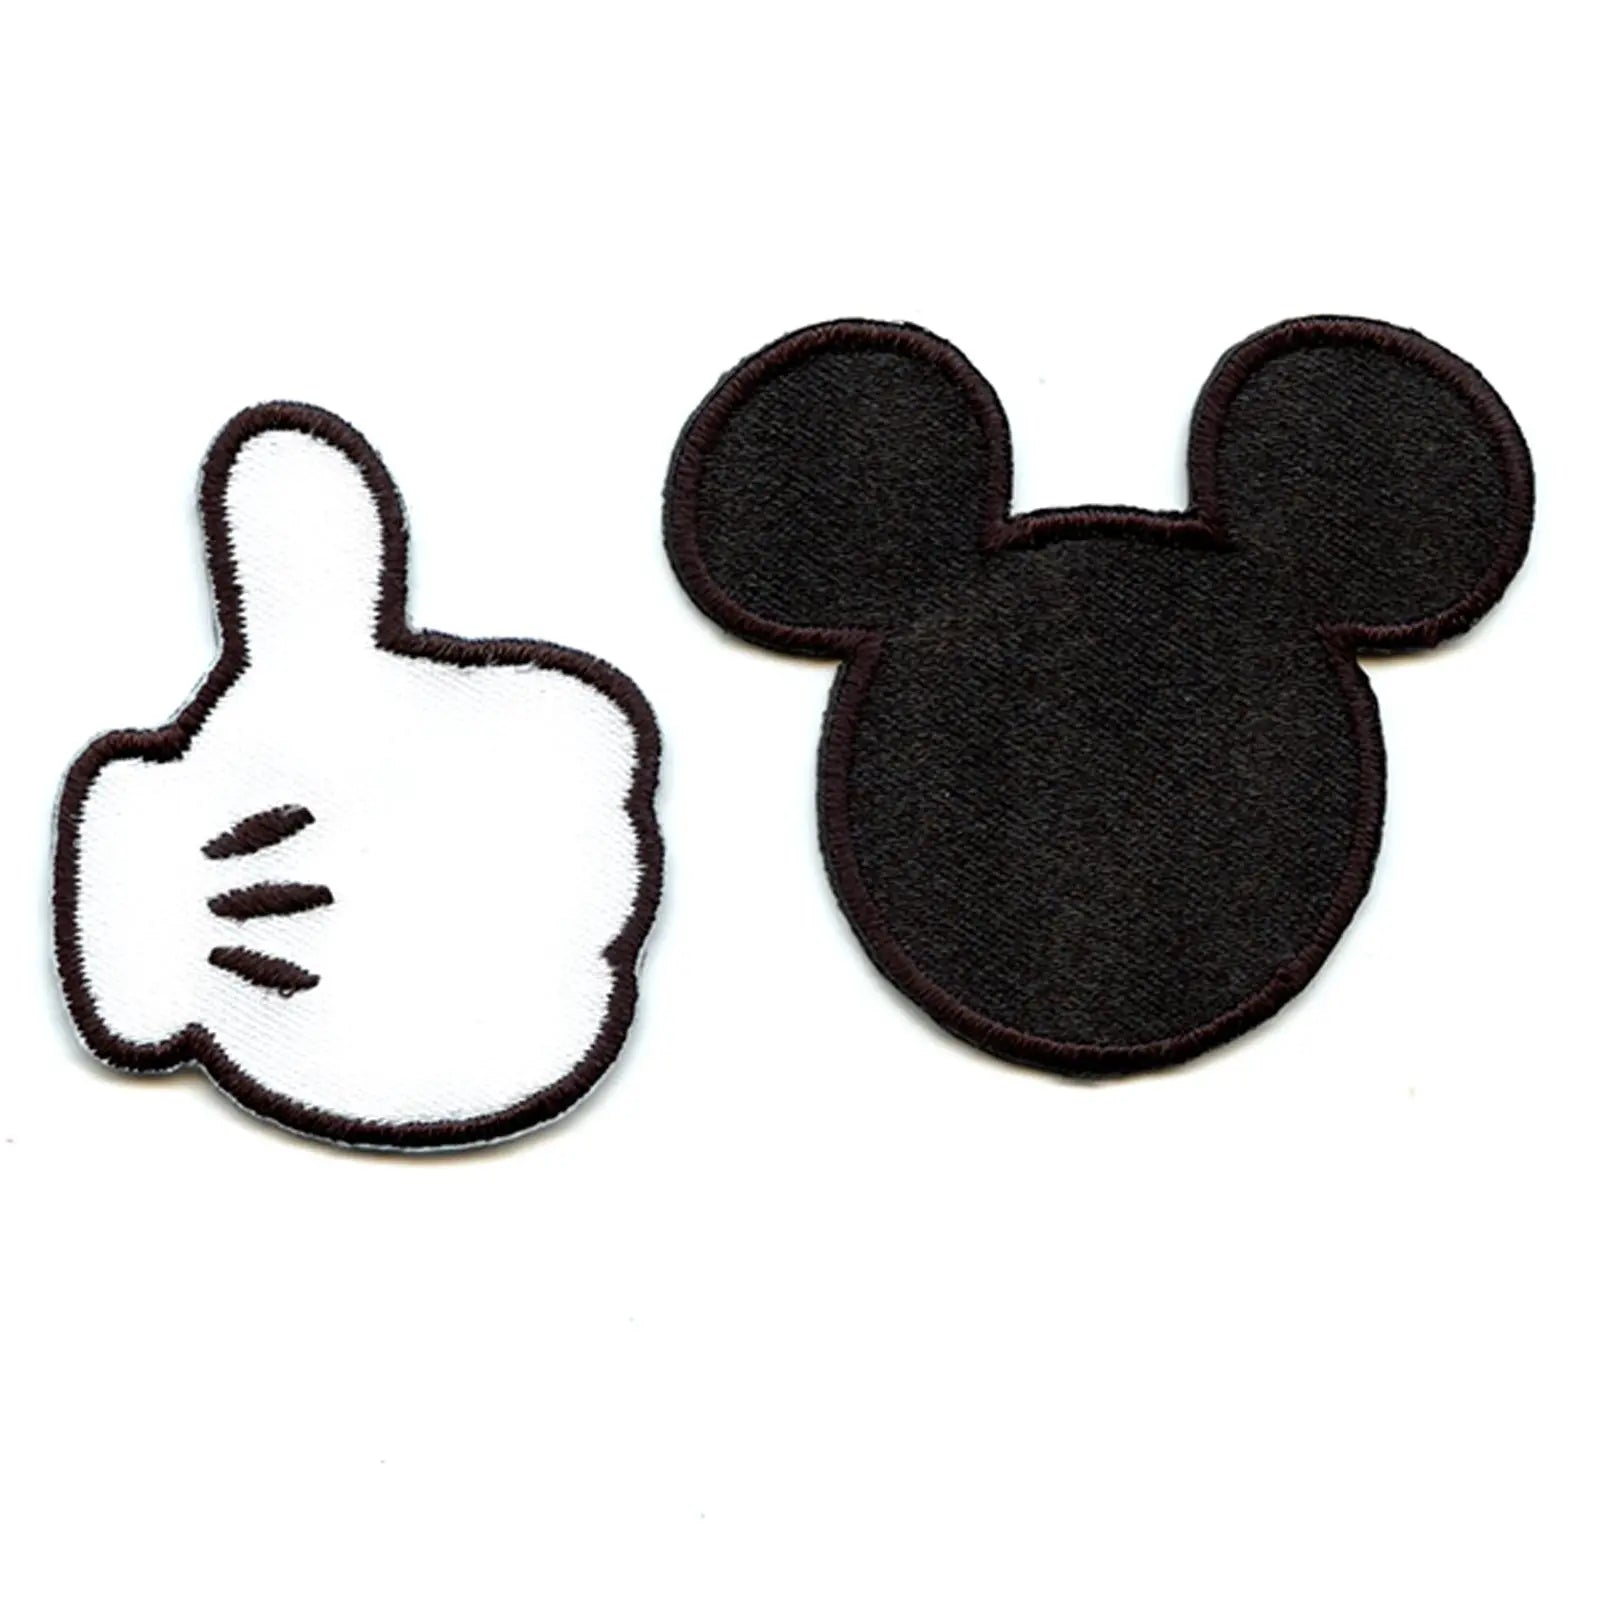 Mickey Mouse Glove Hand Applique Disney Sewing Project Accessory Iron- –  Your Patch Store